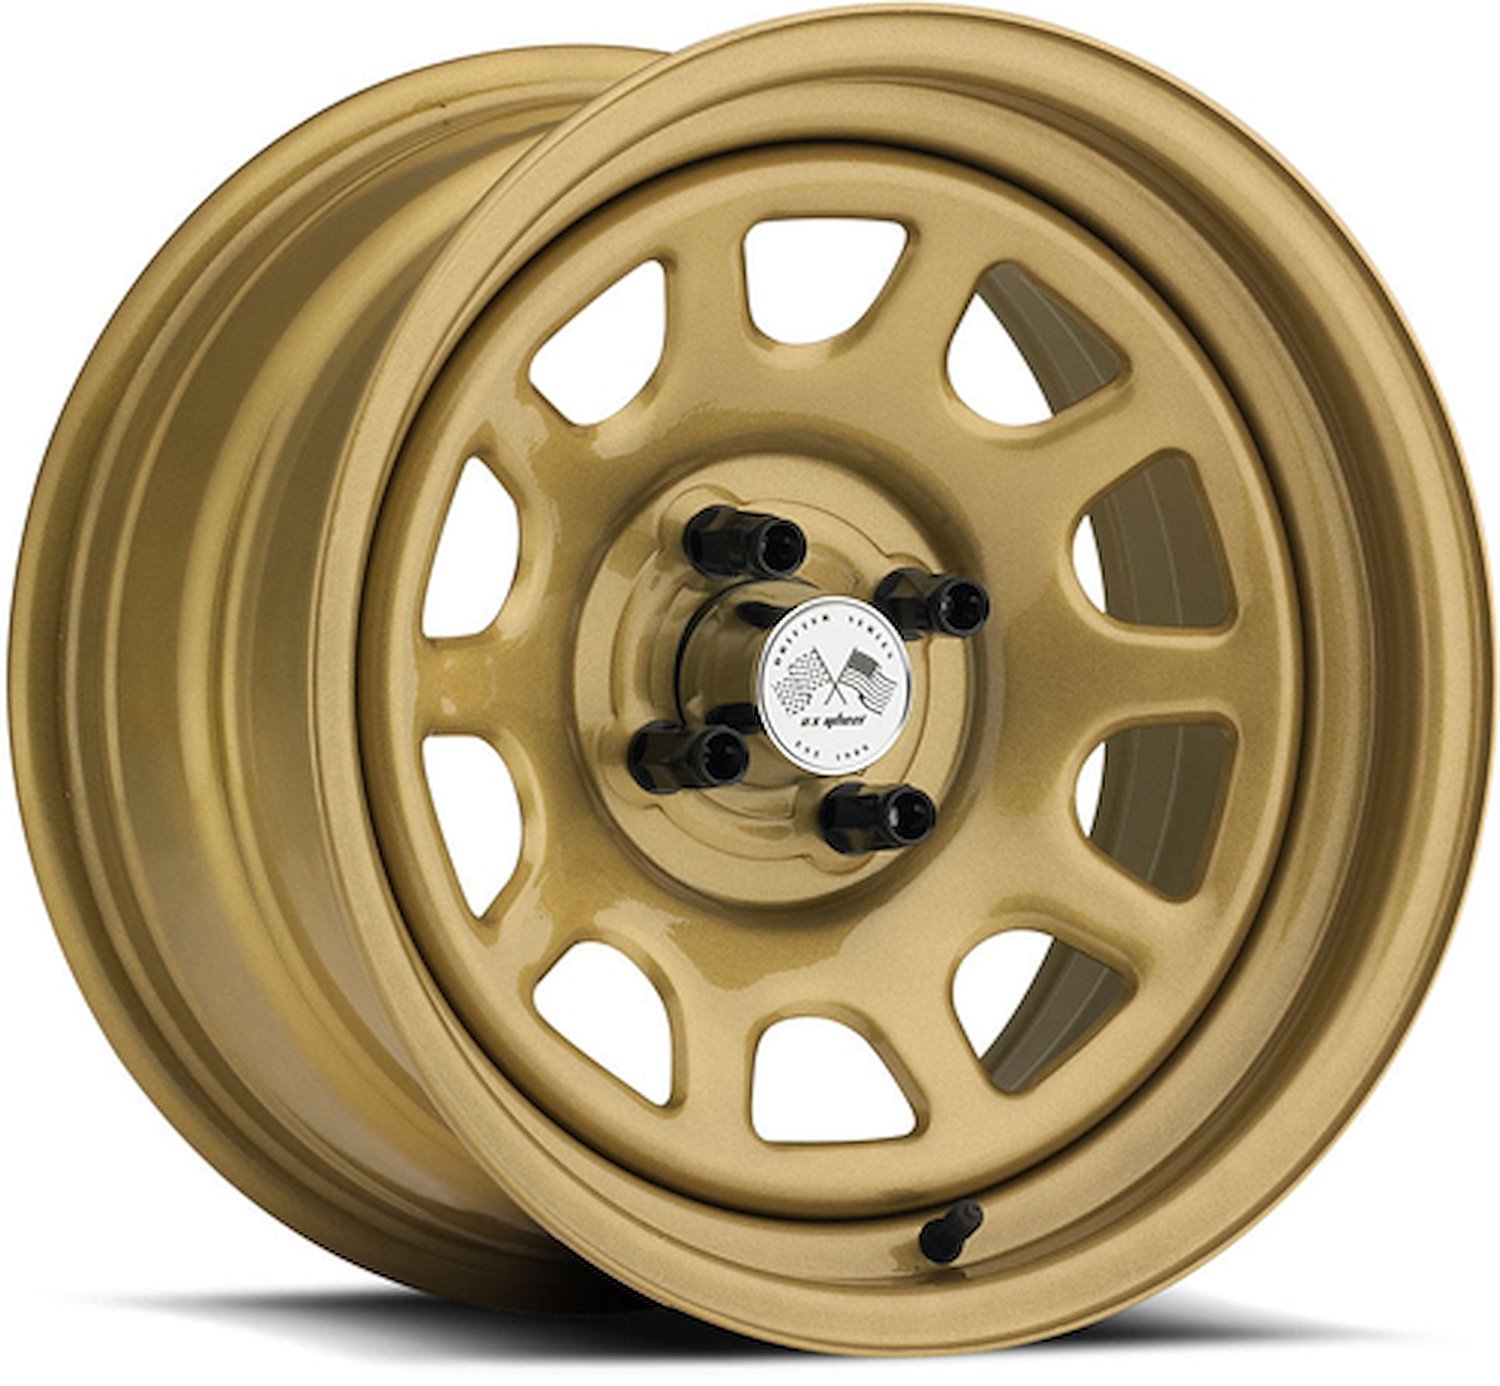 PAINTED DAYTONA FWD DRIFTER GOLD 16 x 8 4 x 100 Bolt Circle 45 Back Spacing 0 offset 266 Center Bore 1400 lbs Load Rating